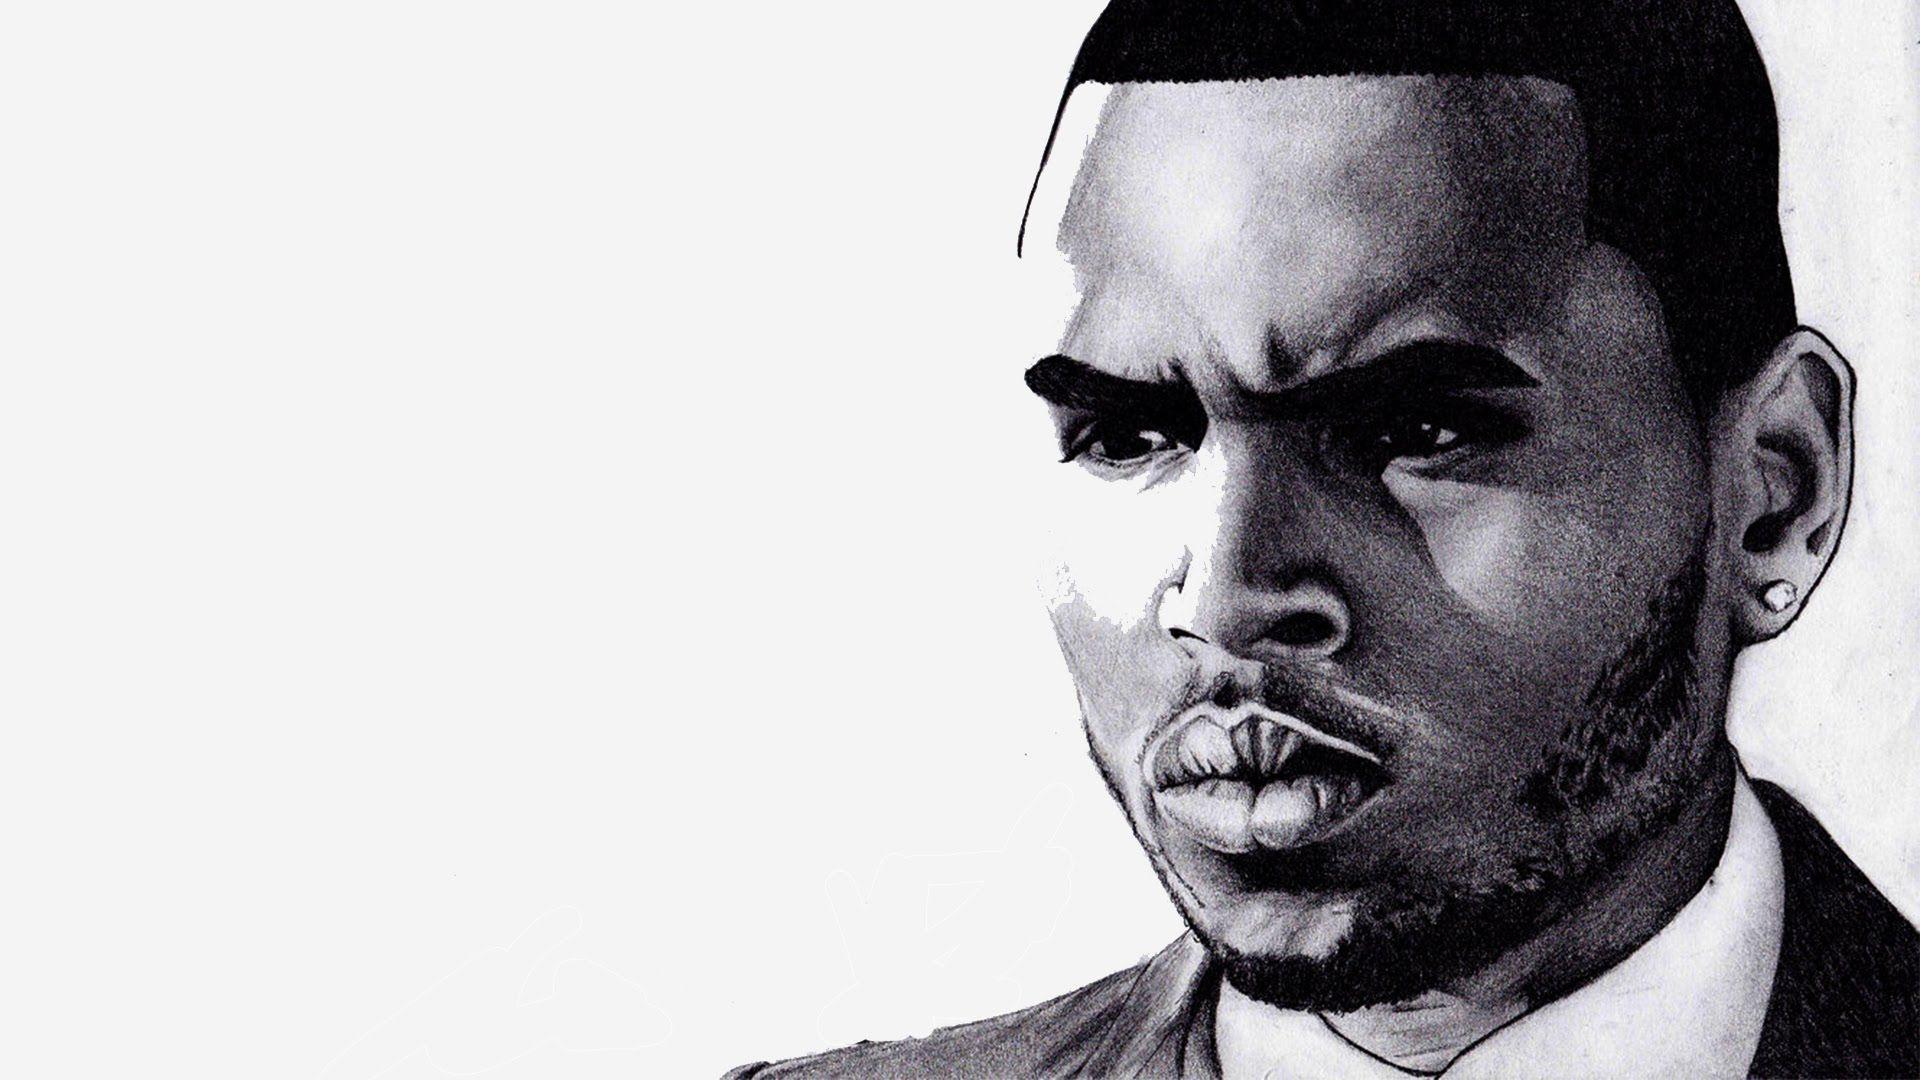 Chris Brown Collabs With Jeezy and Young Thug for Wrist (Remix)